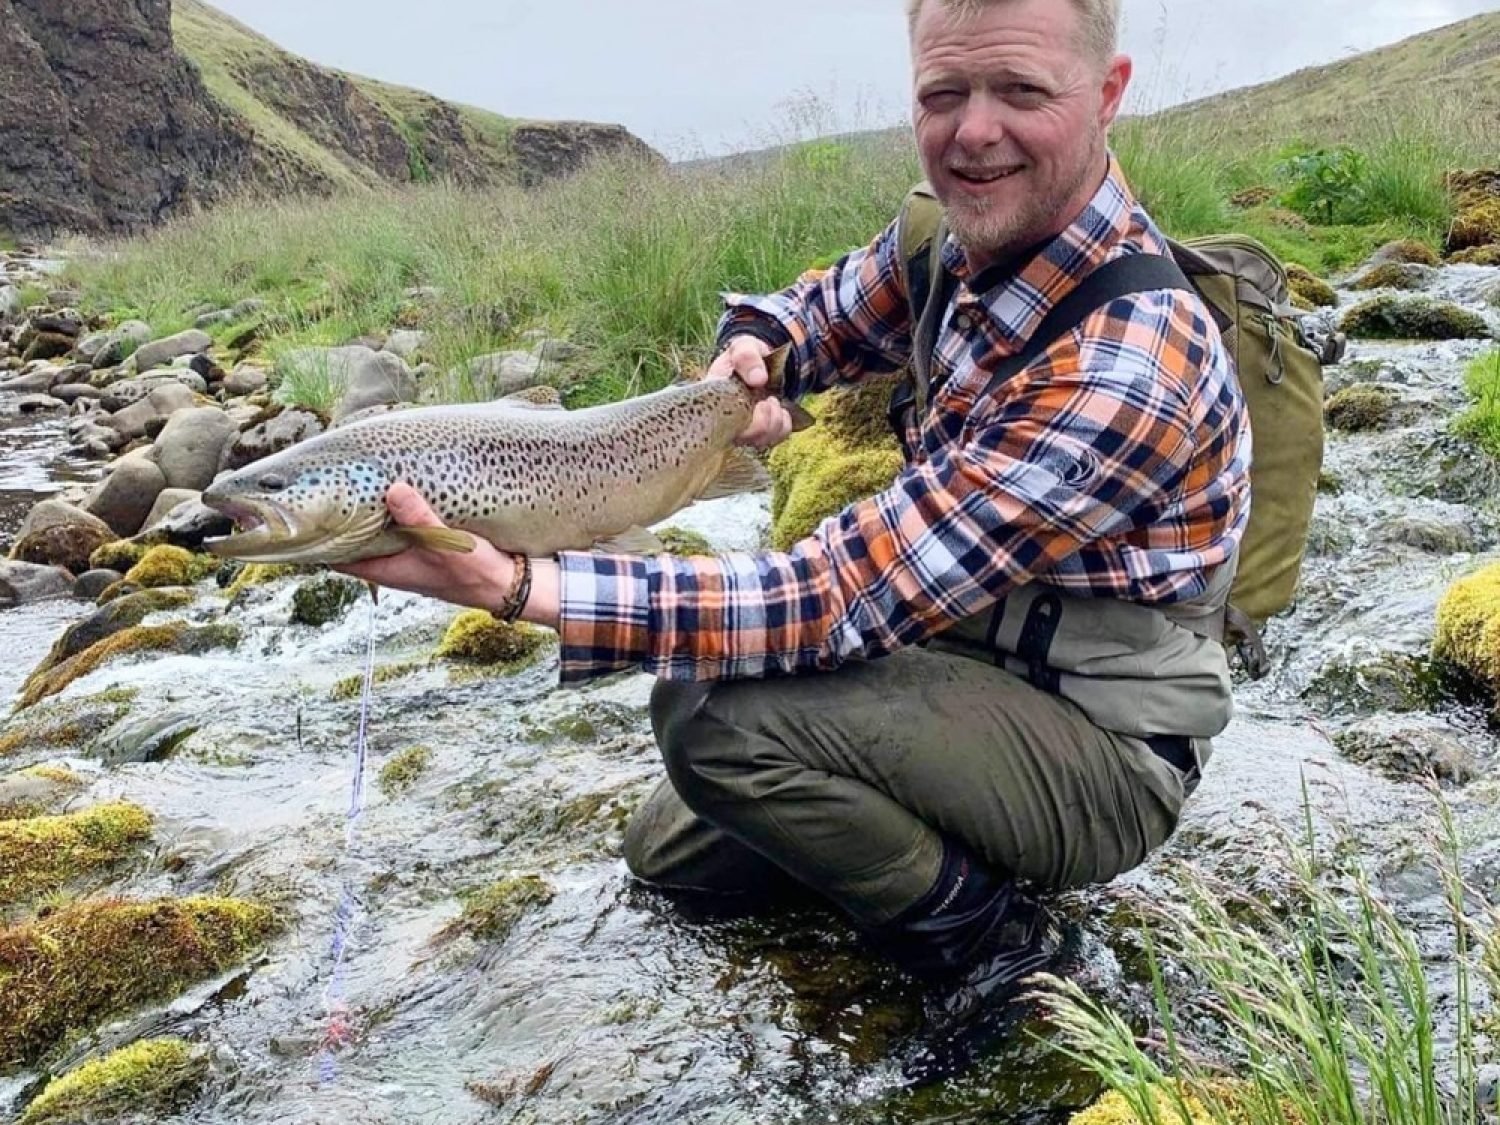 Oli, the dedicated fly fishing guide, is in action